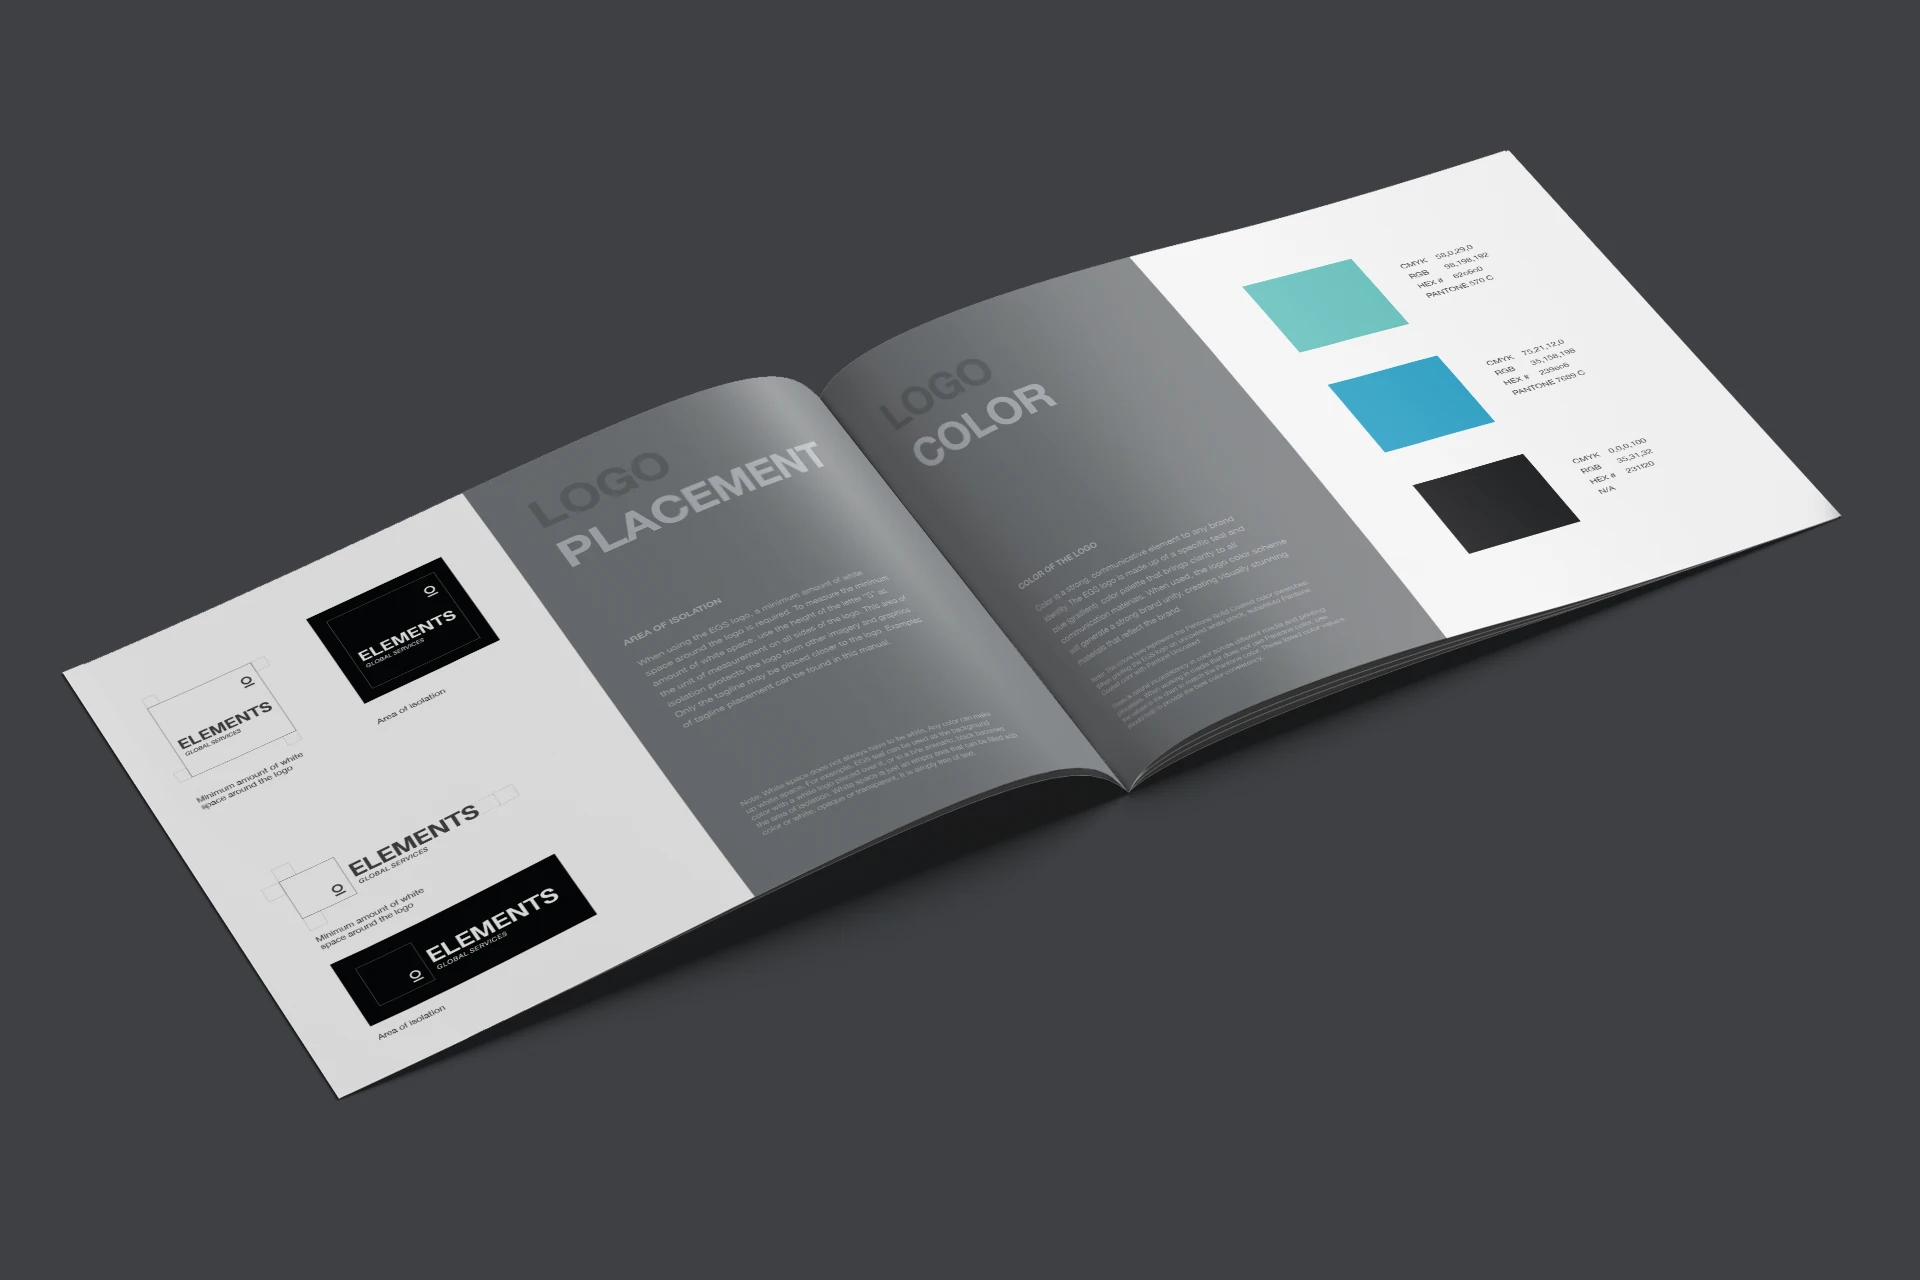 Logo design and color selection pages from a brand manual.